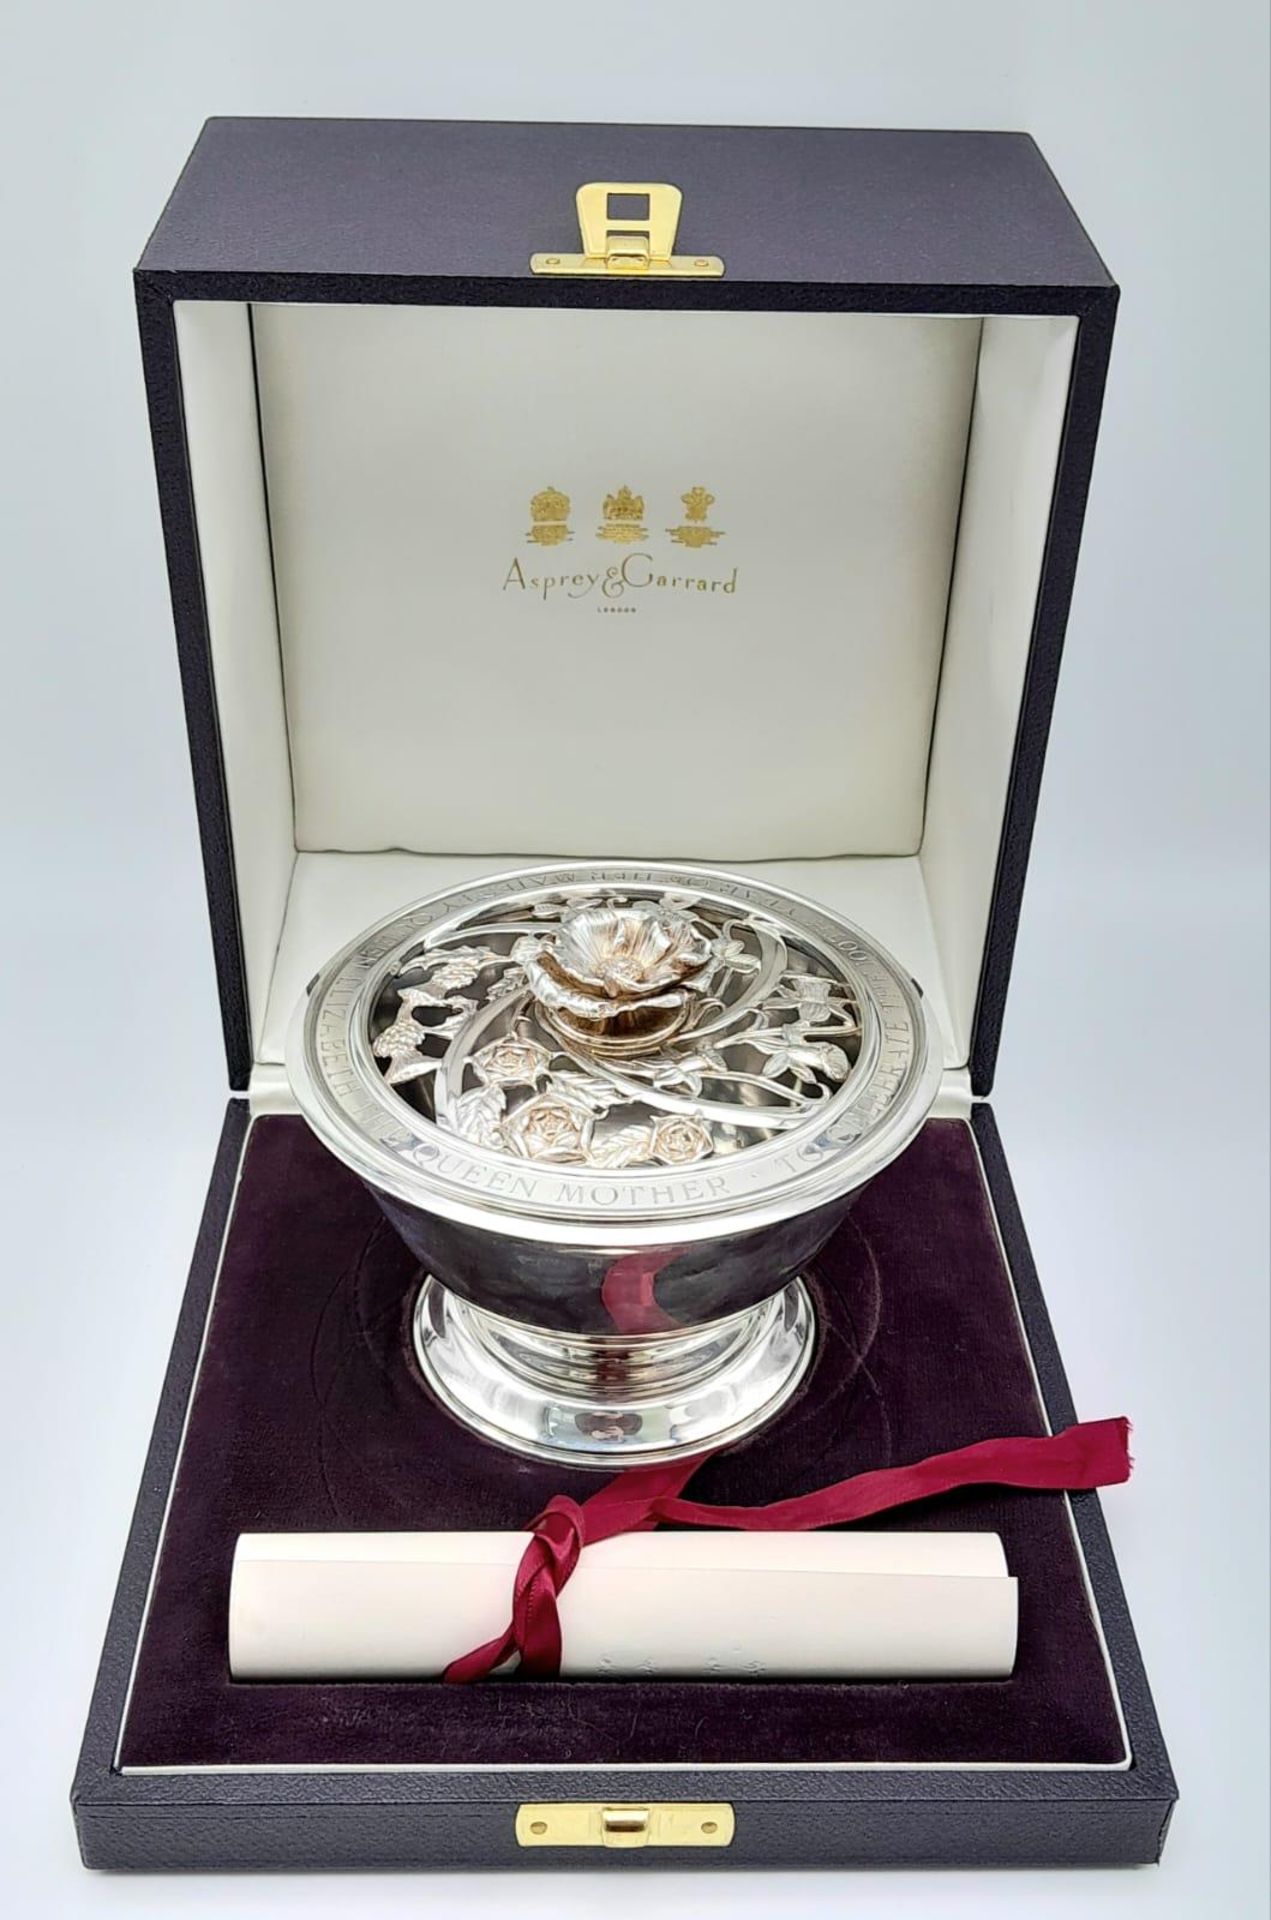 An Asprey of London Limited Edition (55 of 100) Sterling Silver Posy Bowl. Beautiful ornate and